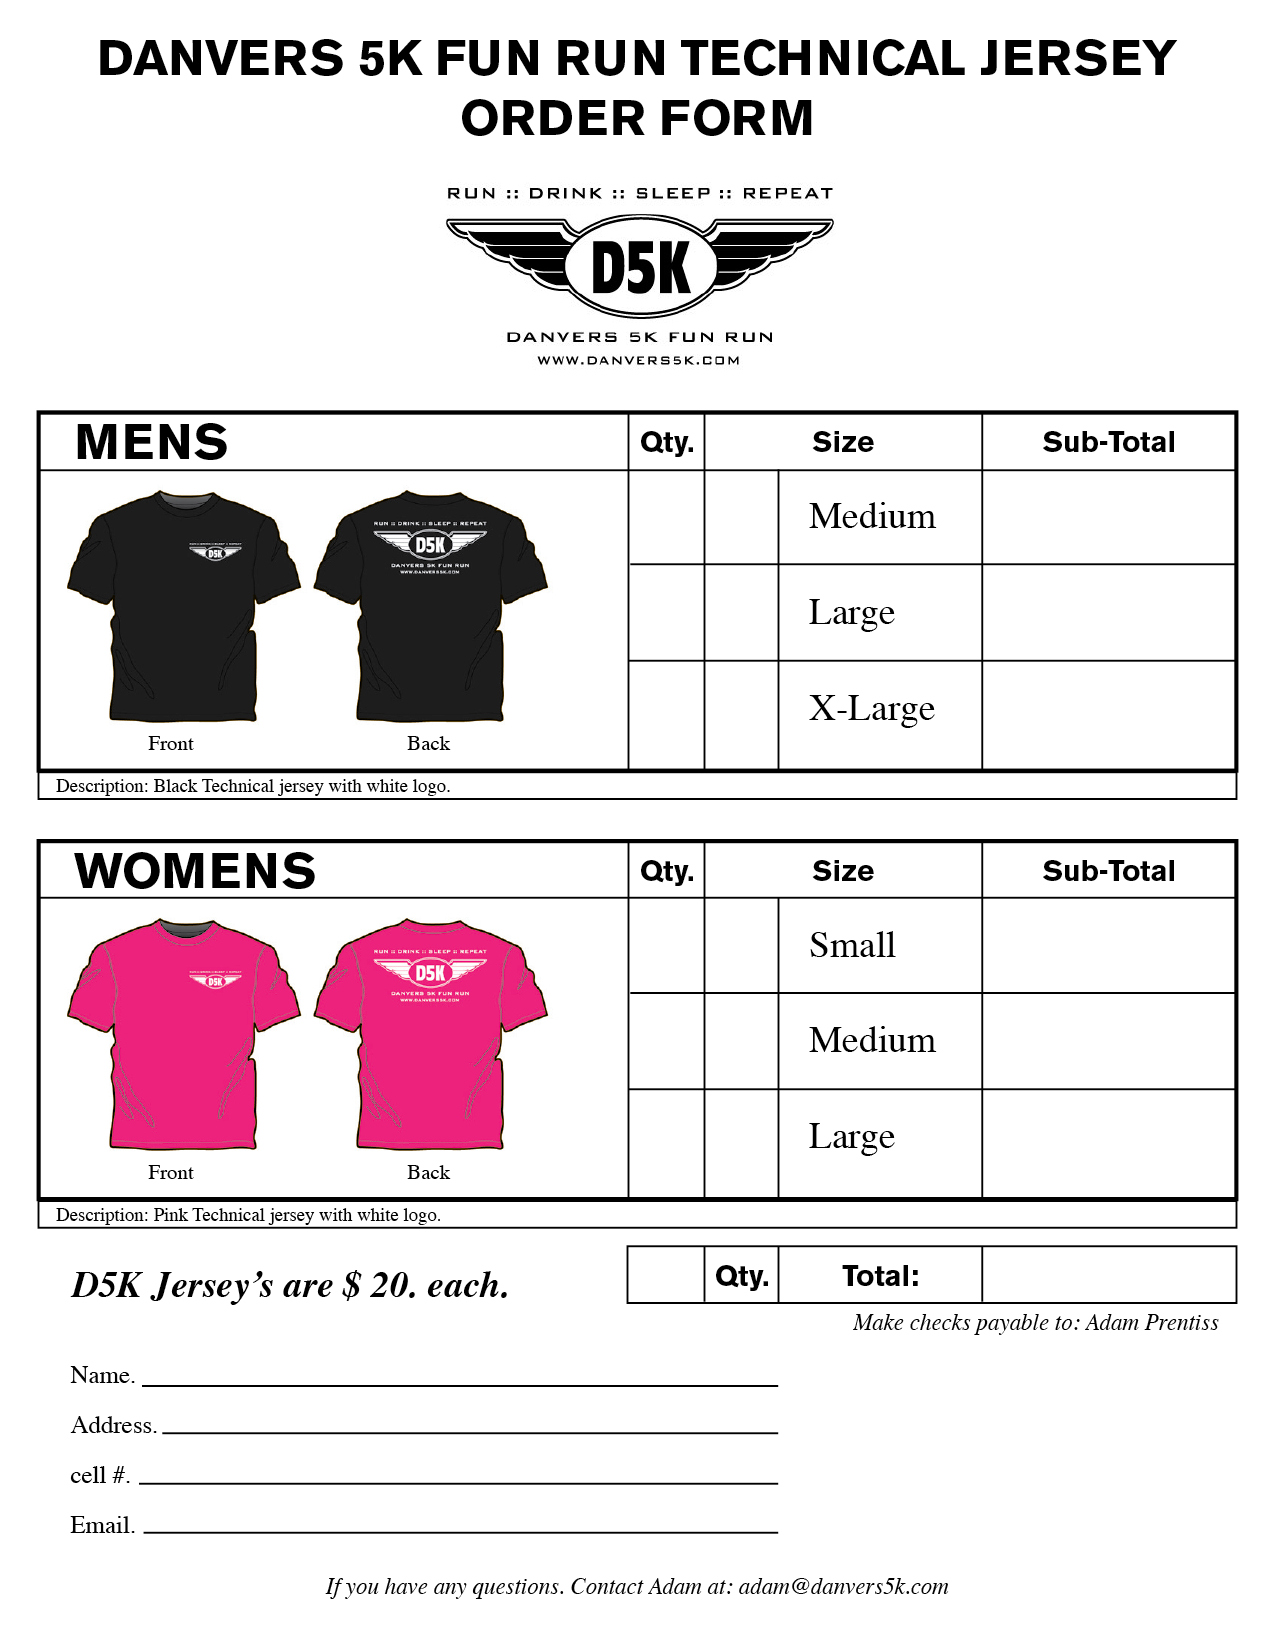 T-Shirt Order Forms - the danvers 5K